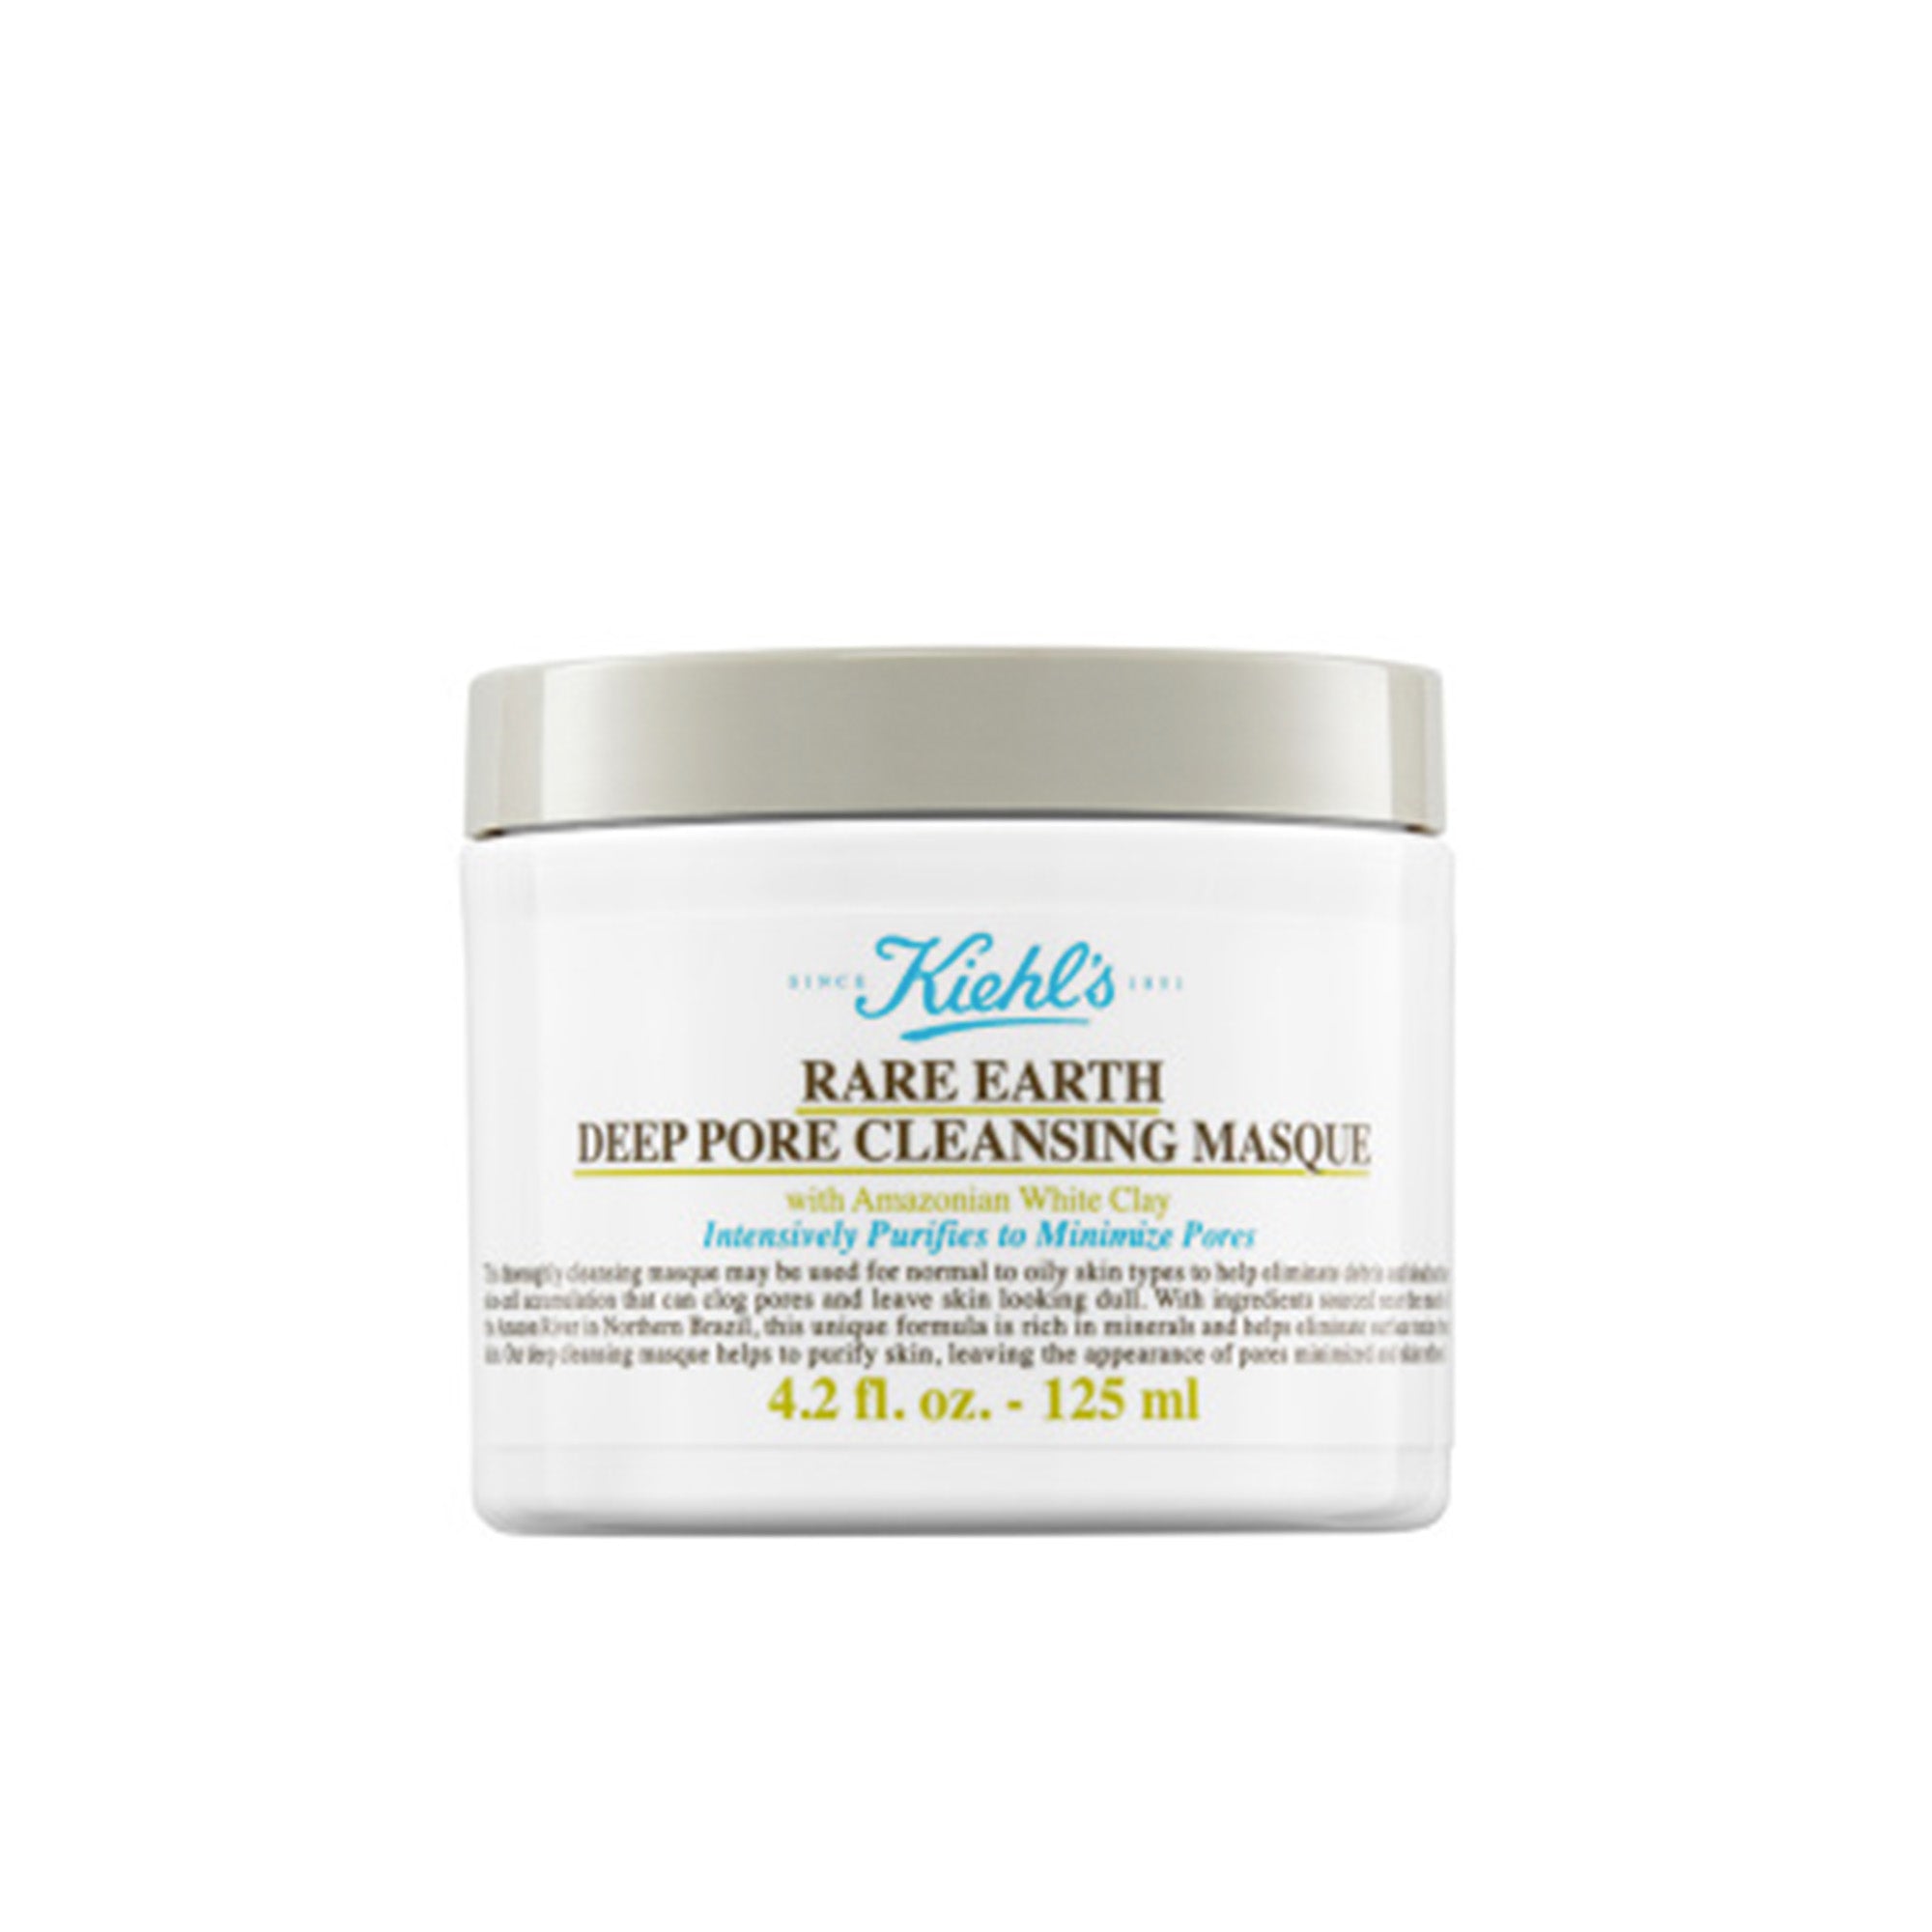 Kiehl's Amazon White Clay Pore Deep Cleansing Mask | RARE EARTH DEEP PORE CLEANSING MASQUE 125ml